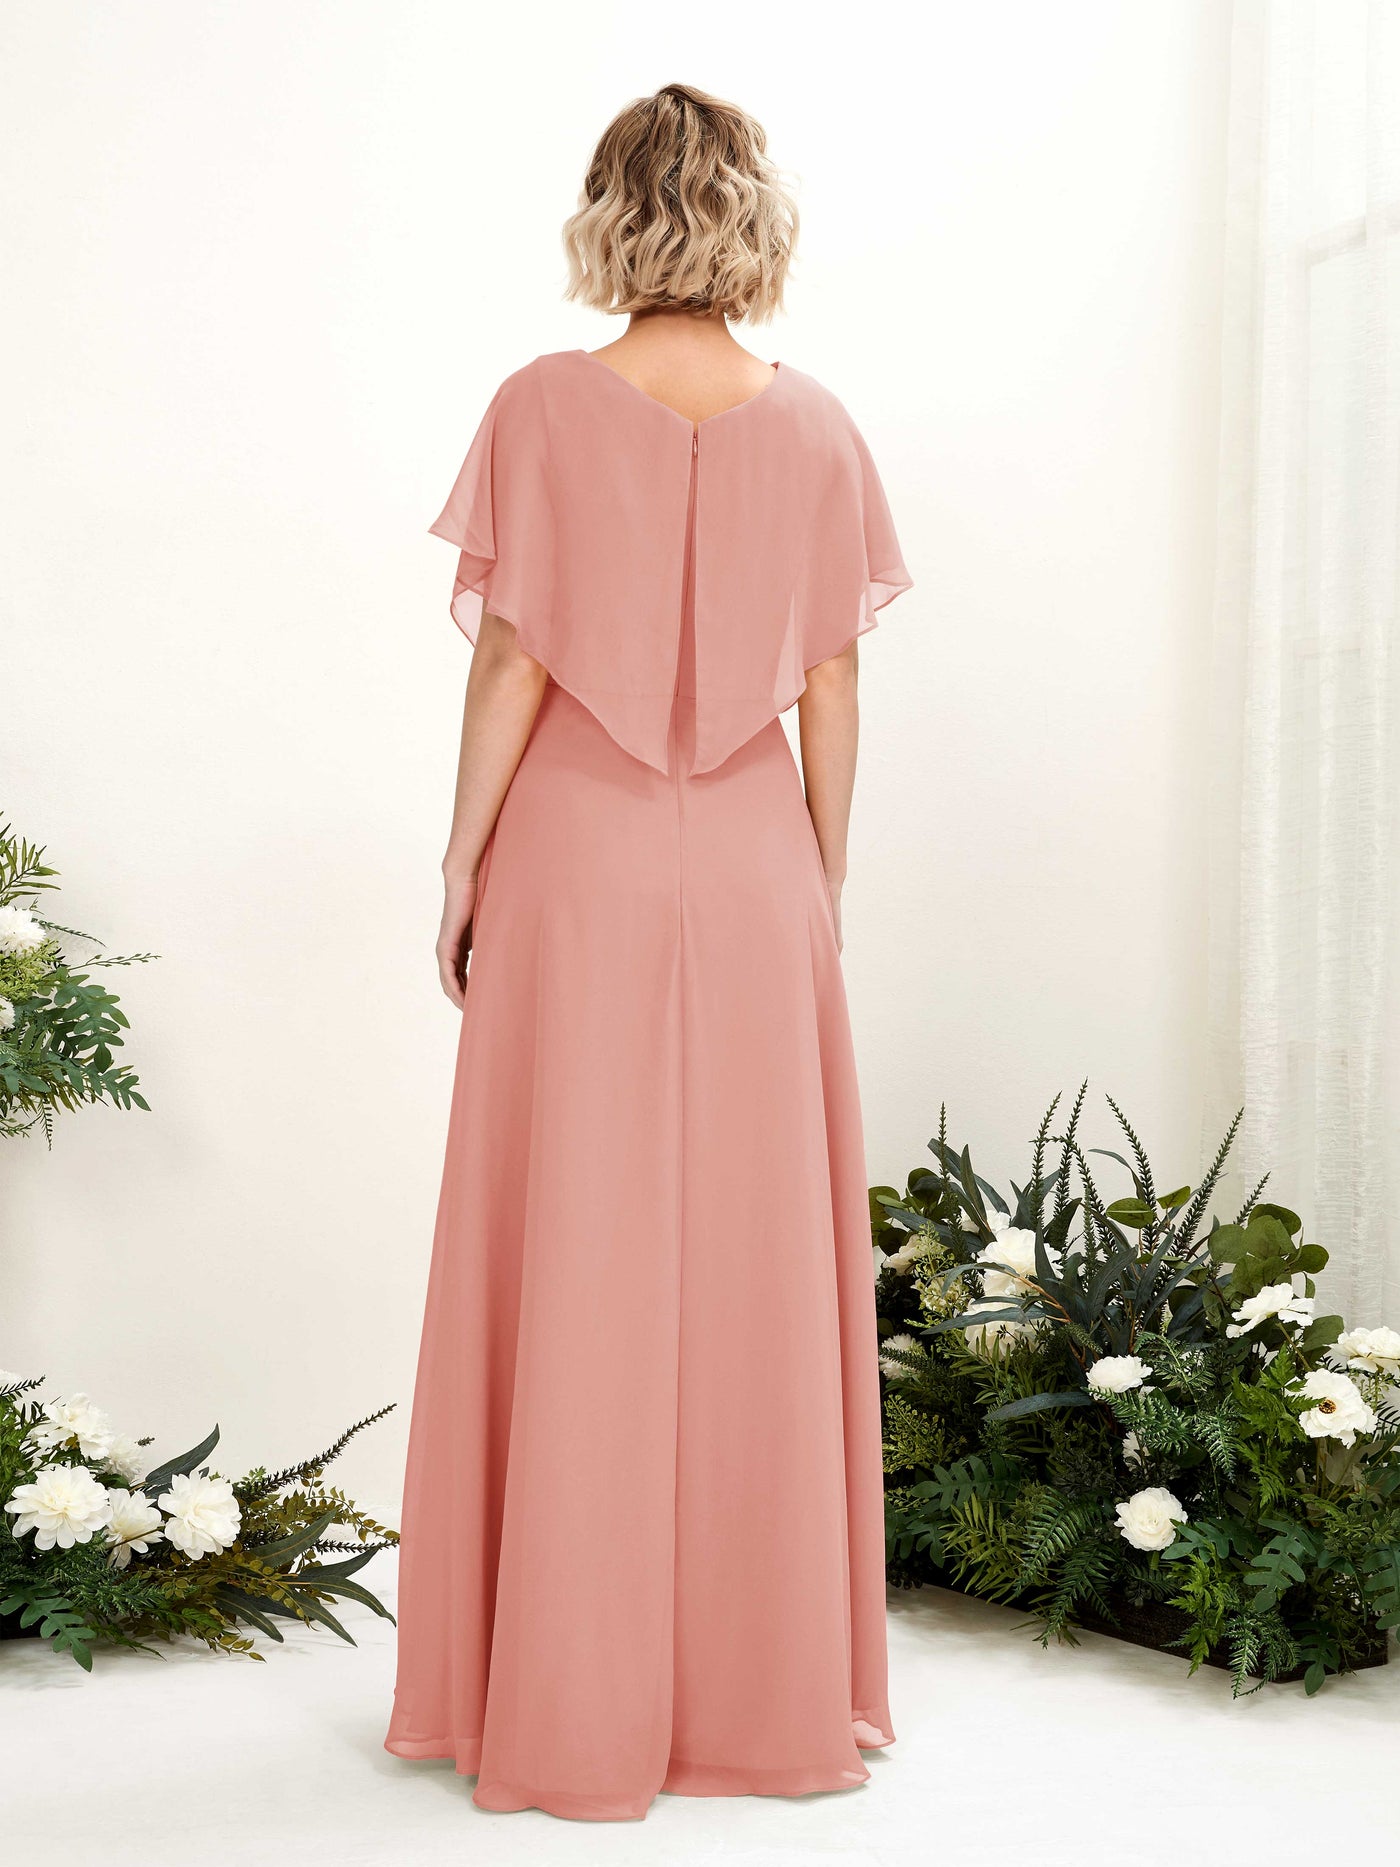 Champagne Rose Bridesmaid Dresses Bridesmaid Dress A-line Chiffon V-neck Full Length Short Sleeves Wedding Party Dress (81222106)#color_champagne-rose